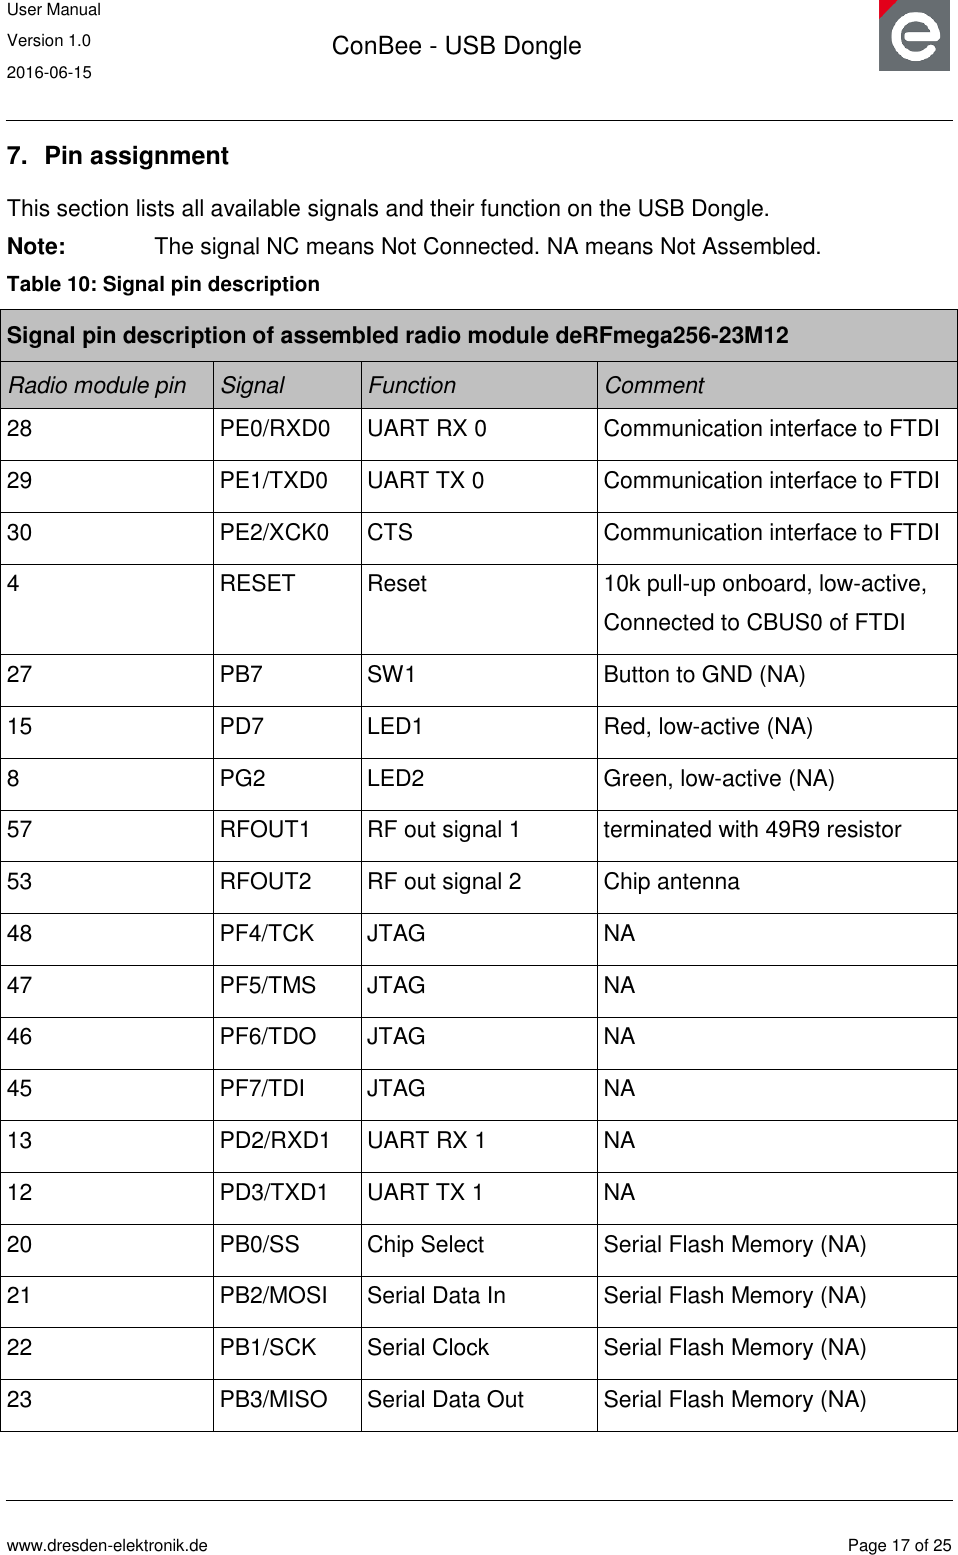 User Manual Version 1.0 2016-06-15  ConBee - USB Dongle      www.dresden-elektronik.de  Page 17 of 25  7.  Pin assignment This section lists all available signals and their function on the USB Dongle.  Note:    The signal NC means Not Connected. NA means Not Assembled. Table 10: Signal pin description Signal pin description of assembled radio module deRFmega256-23M12 Radio module pin Signal Function Comment 28 PE0/RXD0 UART RX 0 Communication interface to FTDI 29 PE1/TXD0 UART TX 0 Communication interface to FTDI 30 PE2/XCK0 CTS Communication interface to FTDI 4 RESET Reset 10k pull-up onboard, low-active, Connected to CBUS0 of FTDI 27 PB7 SW1 Button to GND (NA) 15 PD7 LED1 Red, low-active (NA) 8 PG2 LED2 Green, low-active (NA) 57 RFOUT1 RF out signal 1 terminated with 49R9 resistor 53 RFOUT2 RF out signal 2 Chip antenna 48 PF4/TCK JTAG NA 47 PF5/TMS JTAG NA 46 PF6/TDO JTAG NA 45 PF7/TDI JTAG NA 13 PD2/RXD1 UART RX 1 NA 12 PD3/TXD1 UART TX 1 NA 20 PB0/SS Chip Select Serial Flash Memory (NA) 21 PB2/MOSI Serial Data In Serial Flash Memory (NA) 22 PB1/SCK Serial Clock Serial Flash Memory (NA) 23 PB3/MISO Serial Data Out Serial Flash Memory (NA) 